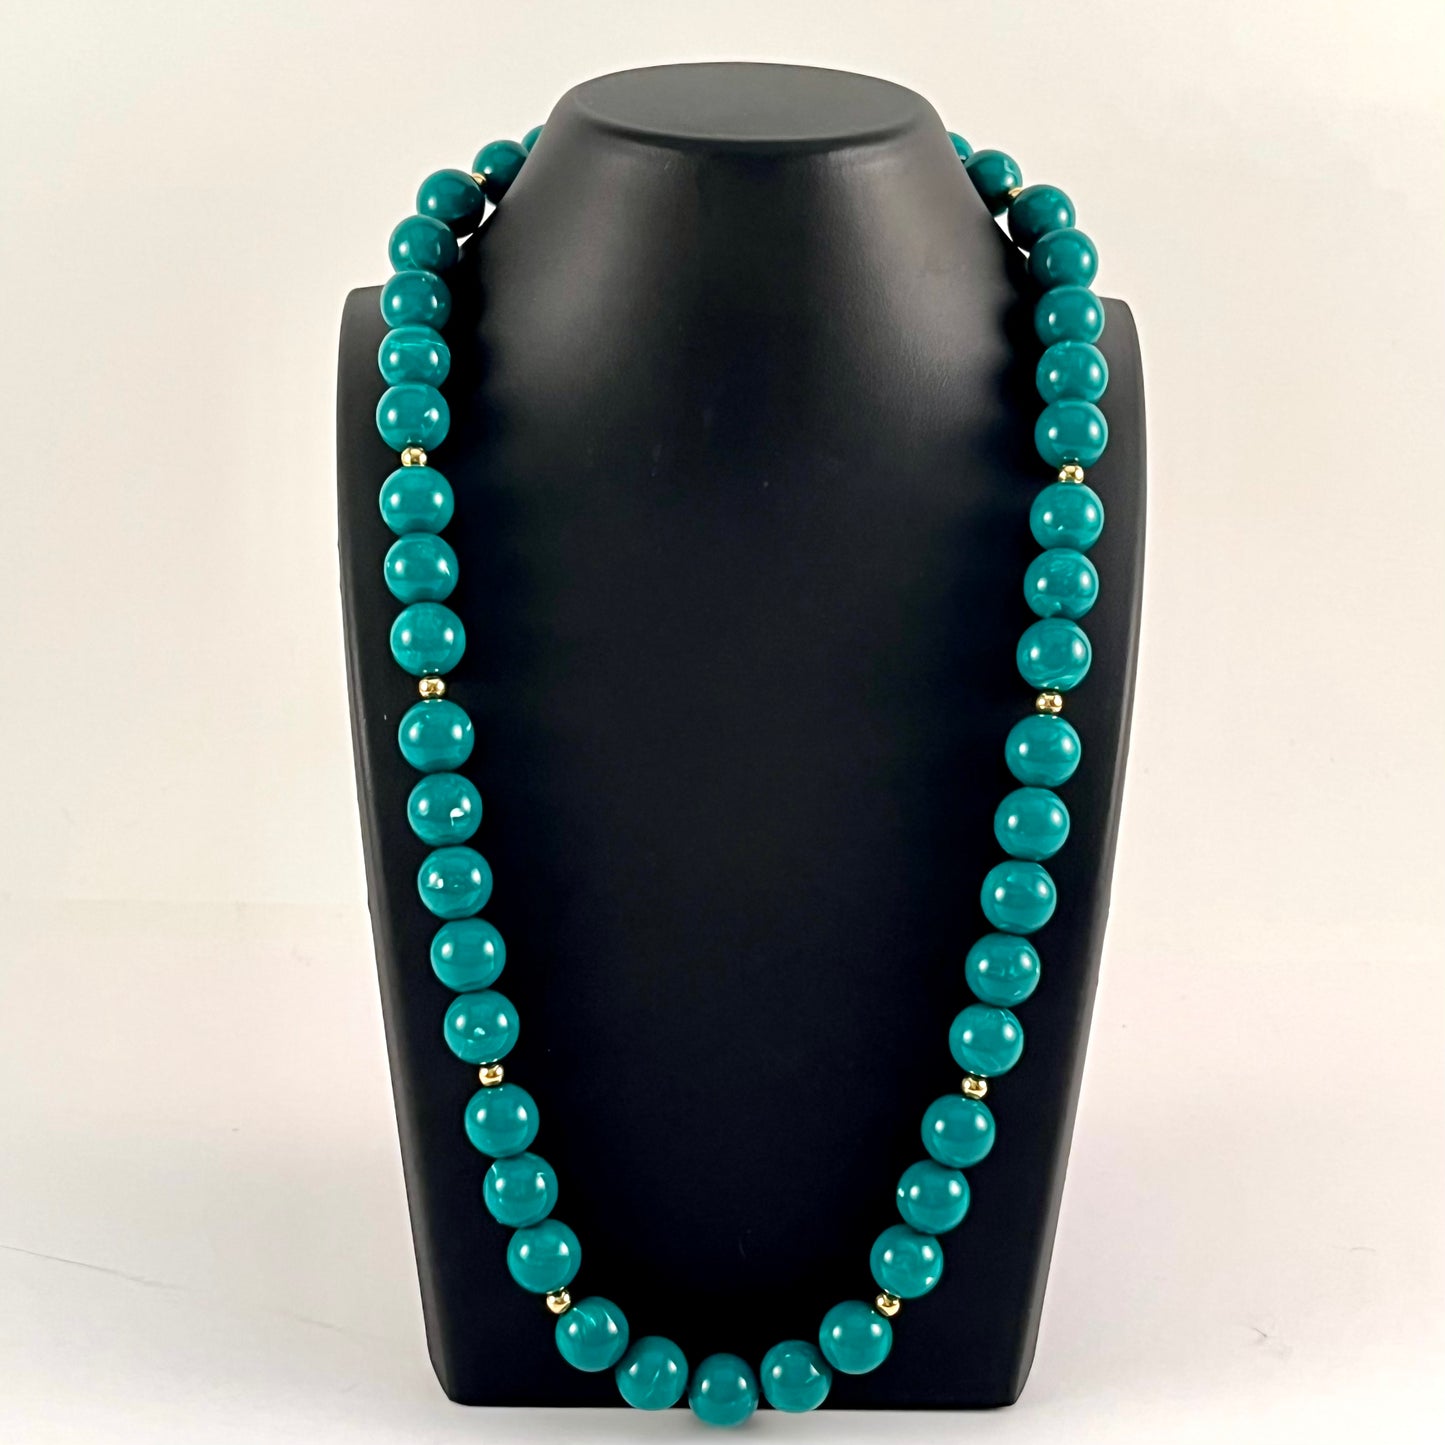 1980s Monet Teal Bead Necklace